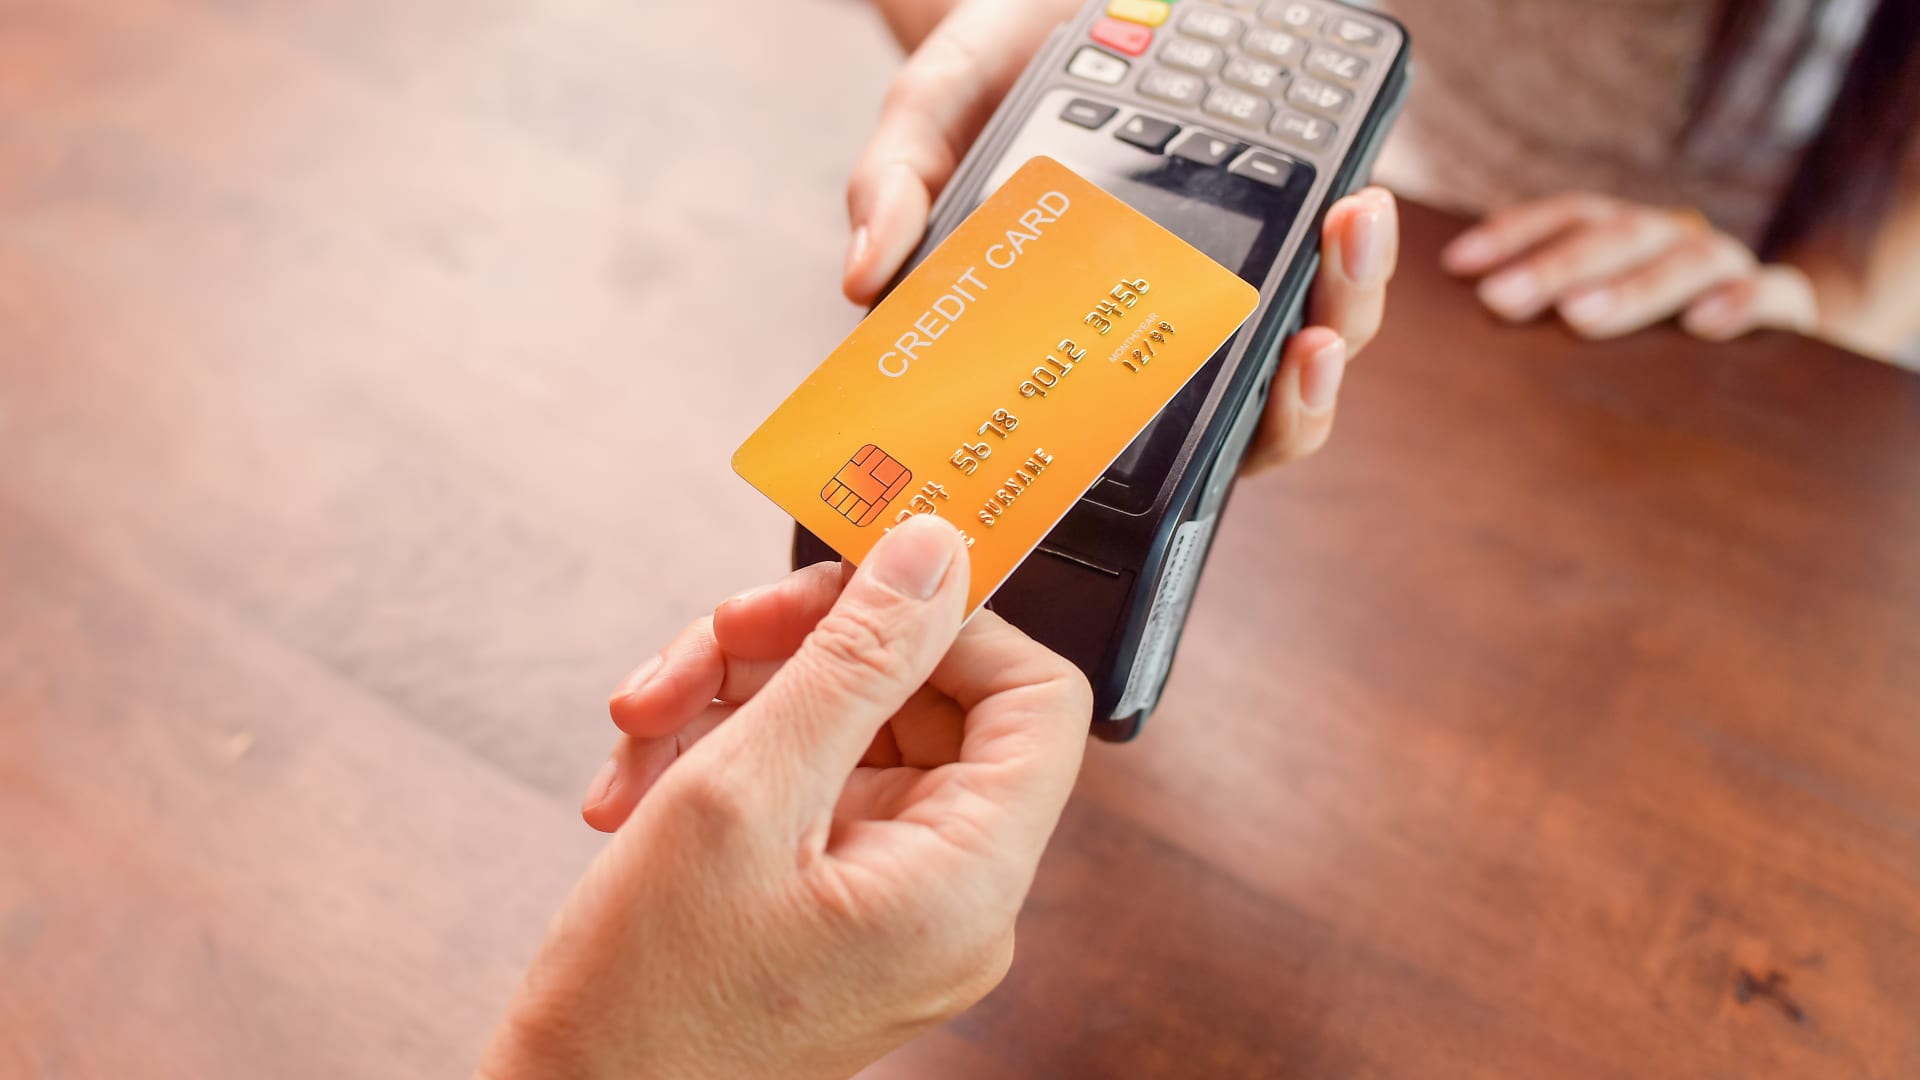 Corporate card unicorn Payhawk plans acquisitions to expand in US [Video]